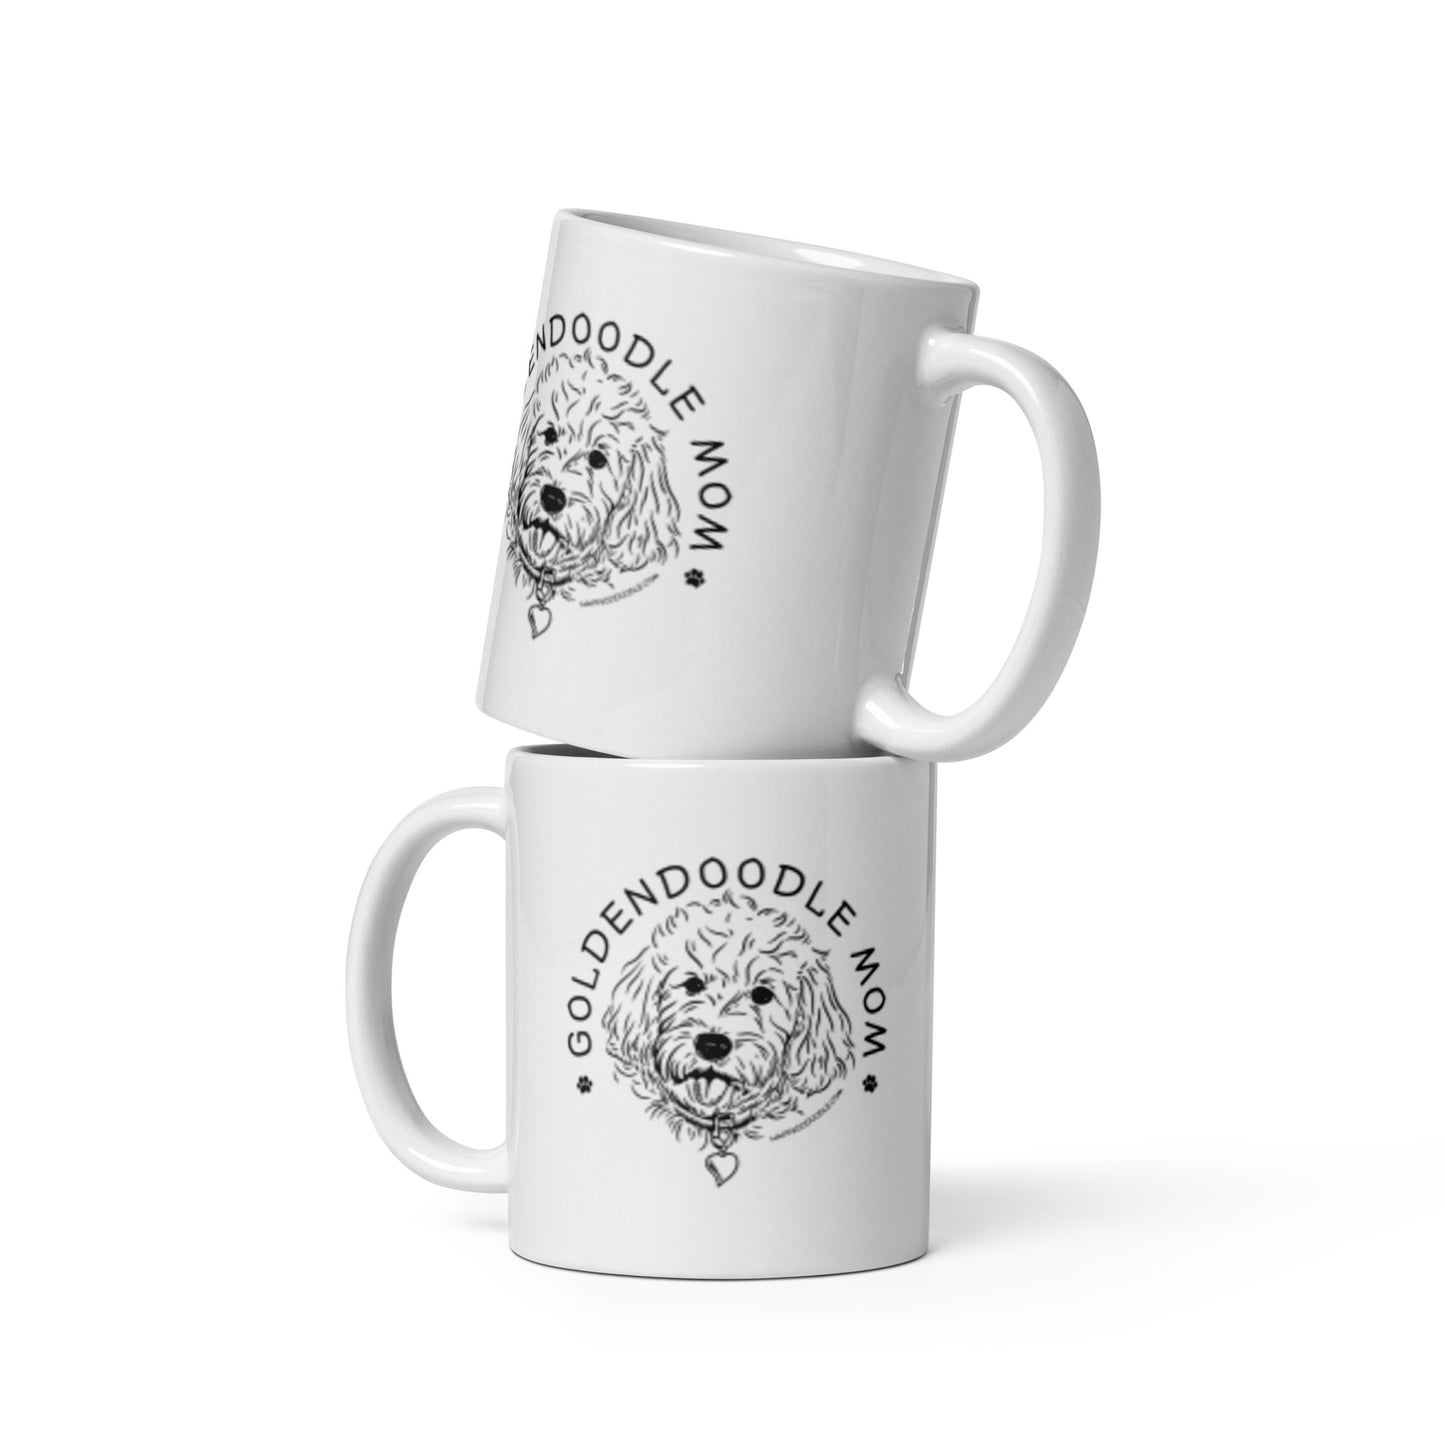 White ceramic coffee mug with a goldendoodle face and words goldendoodle mom